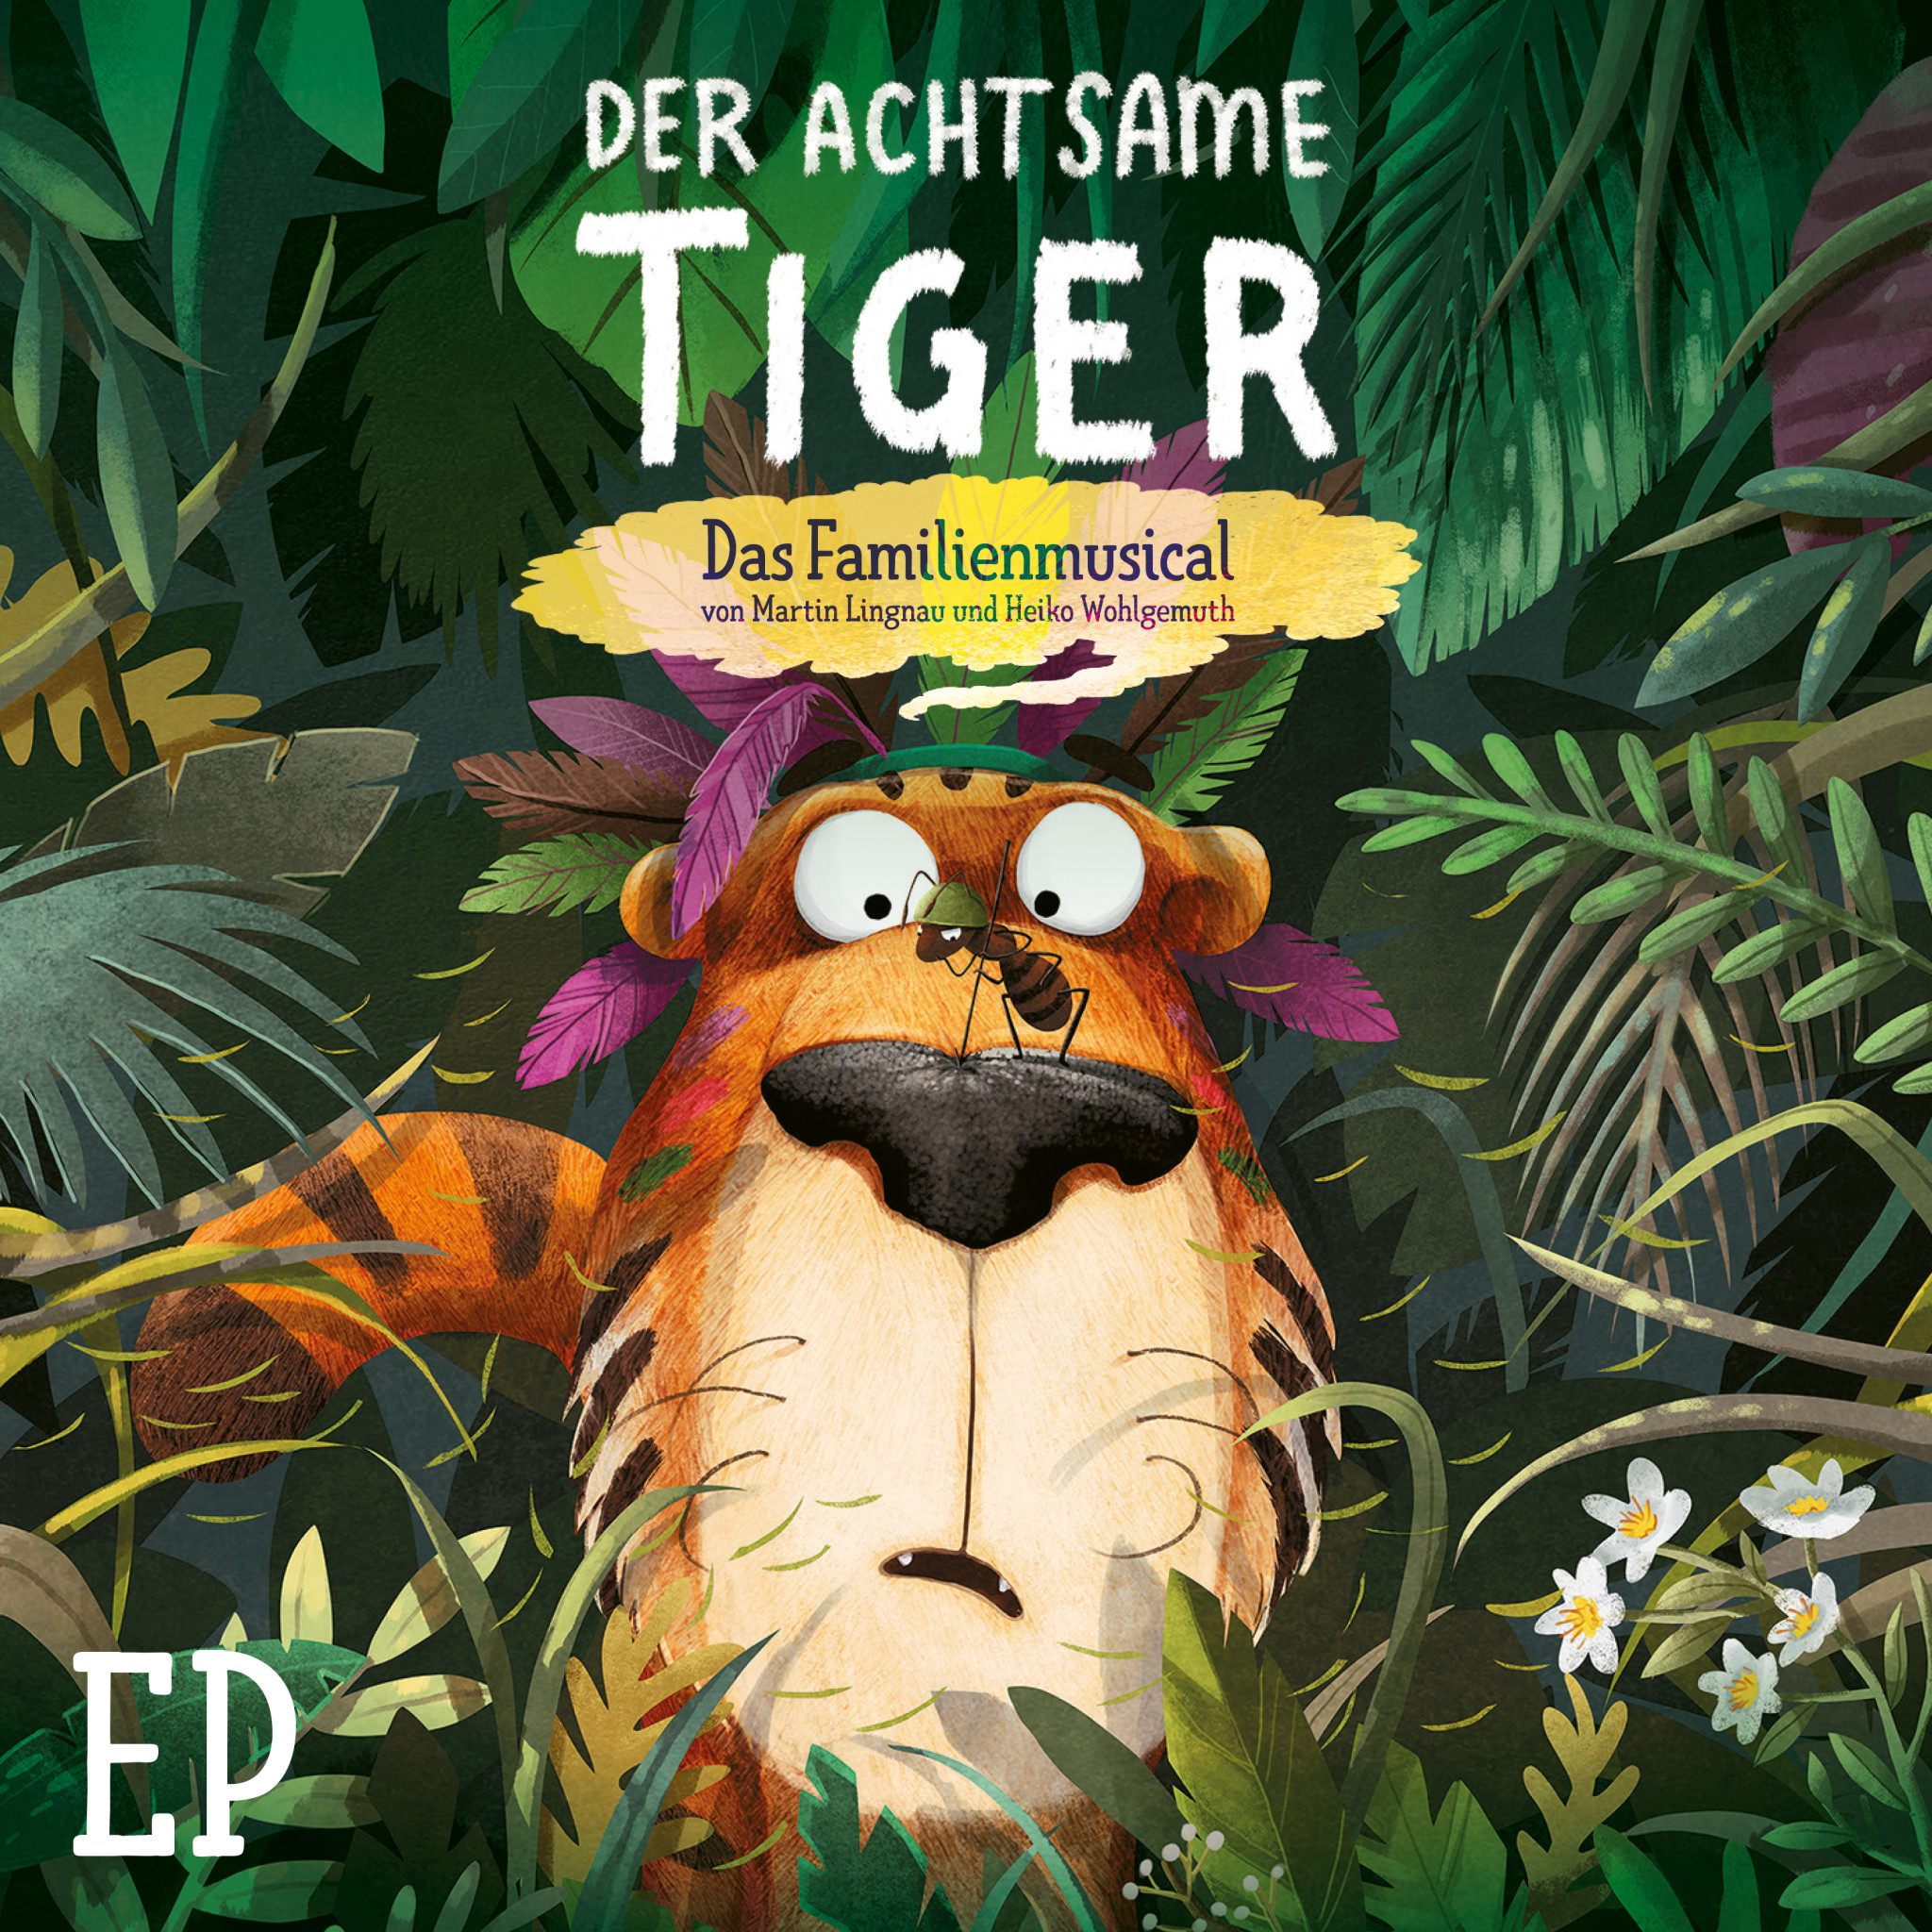 Der achtsame Tiger - EP - Cover